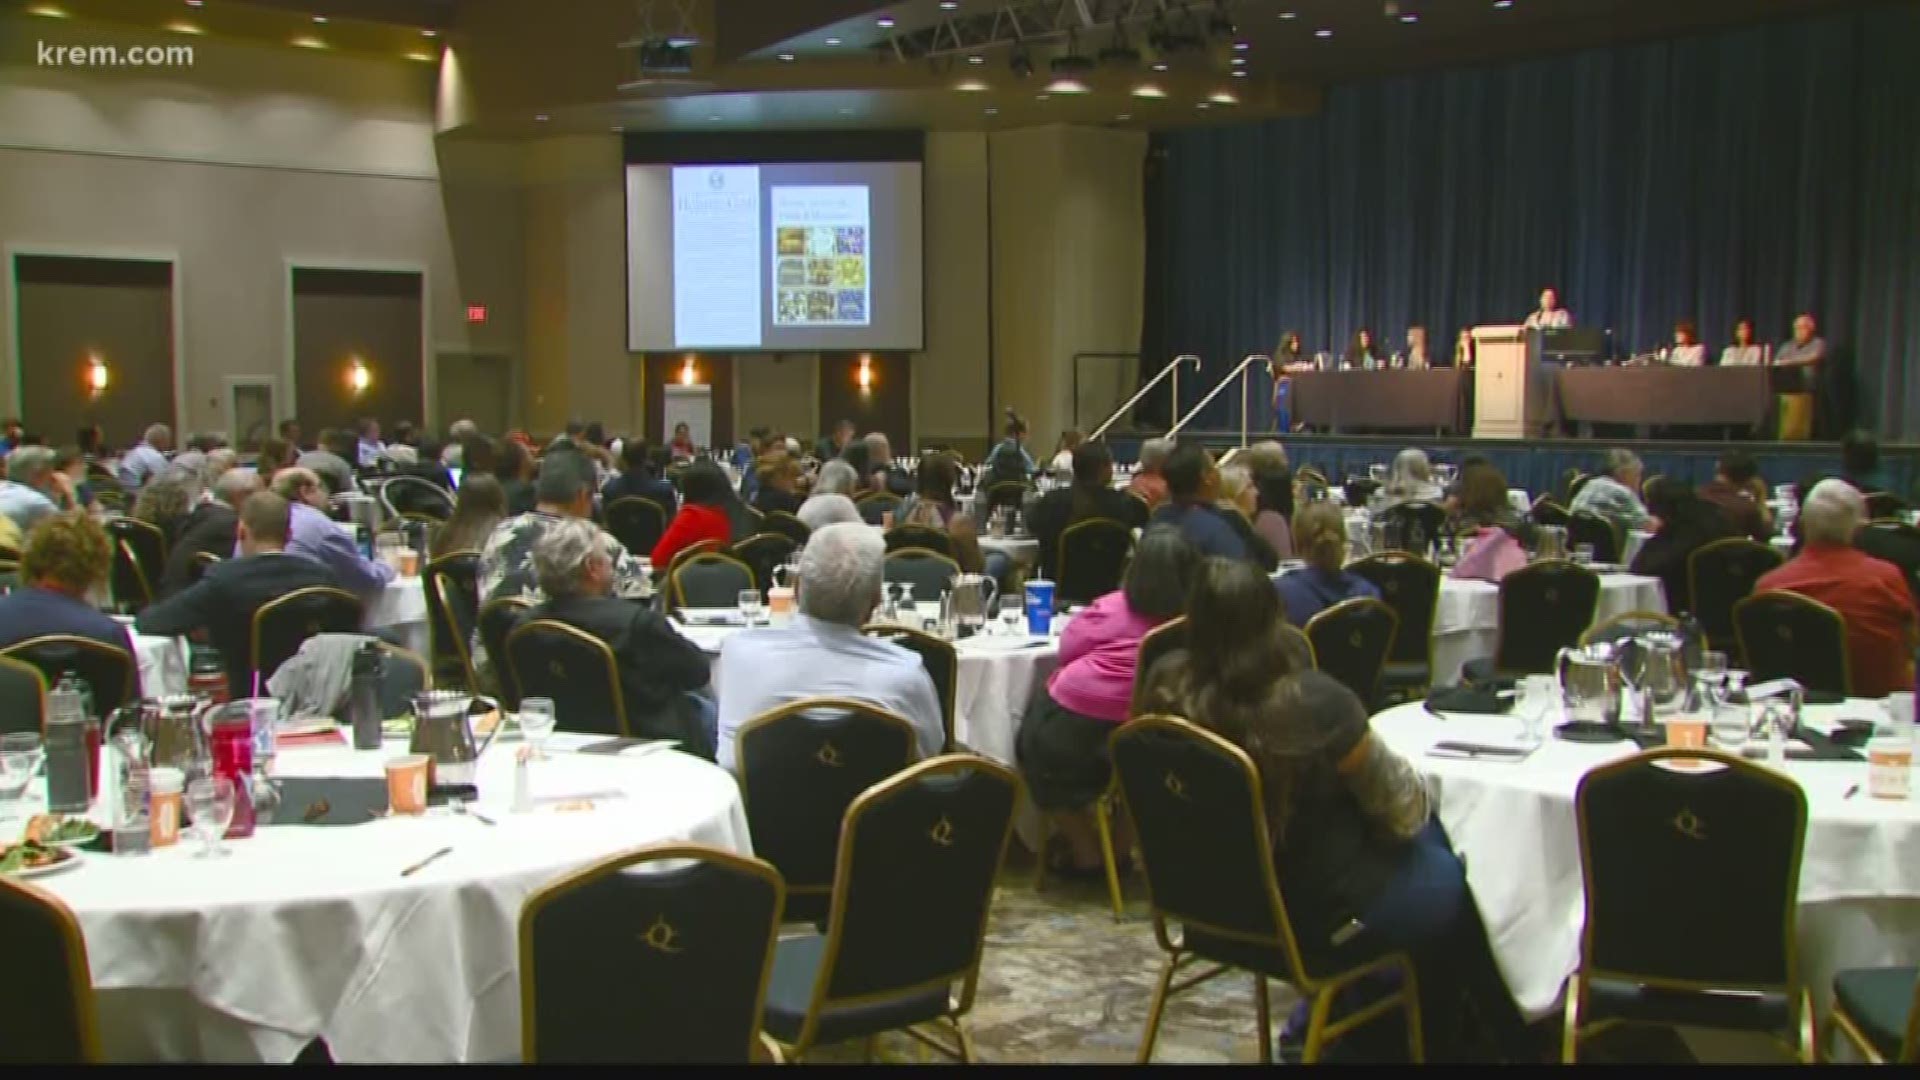 41 Native American tribes gathered at Northern Quest casino today. The reason: a conference on climate change.